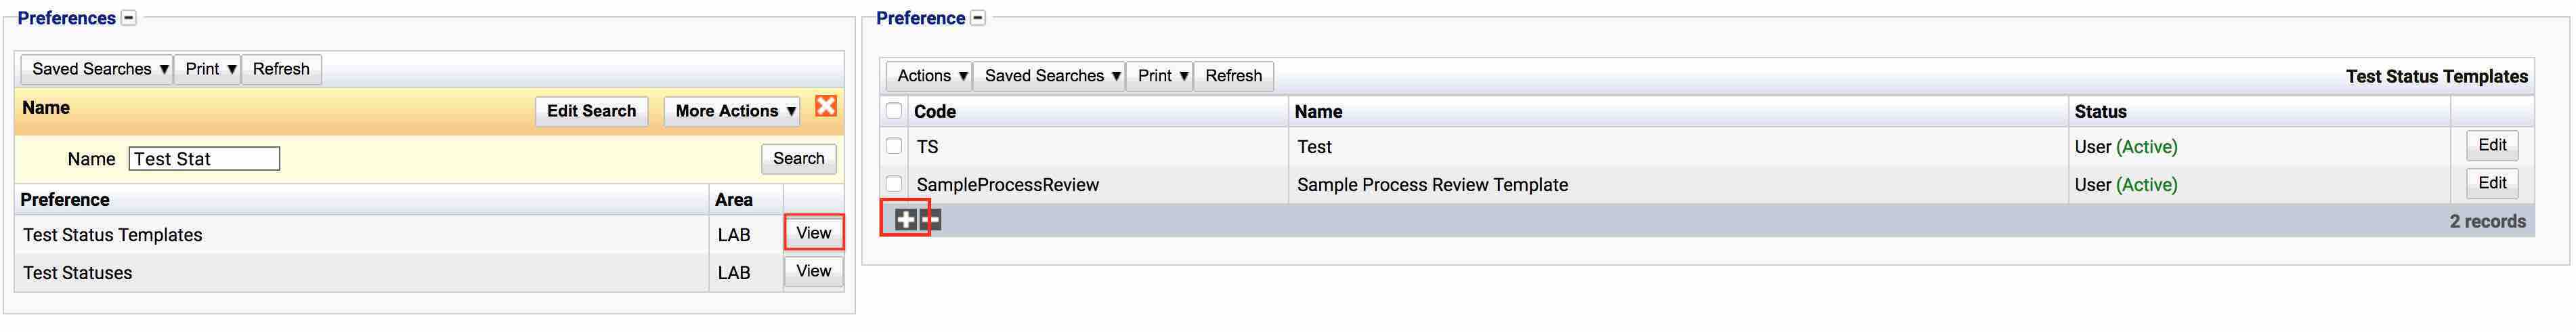 Finding Test Status Templates in preference list